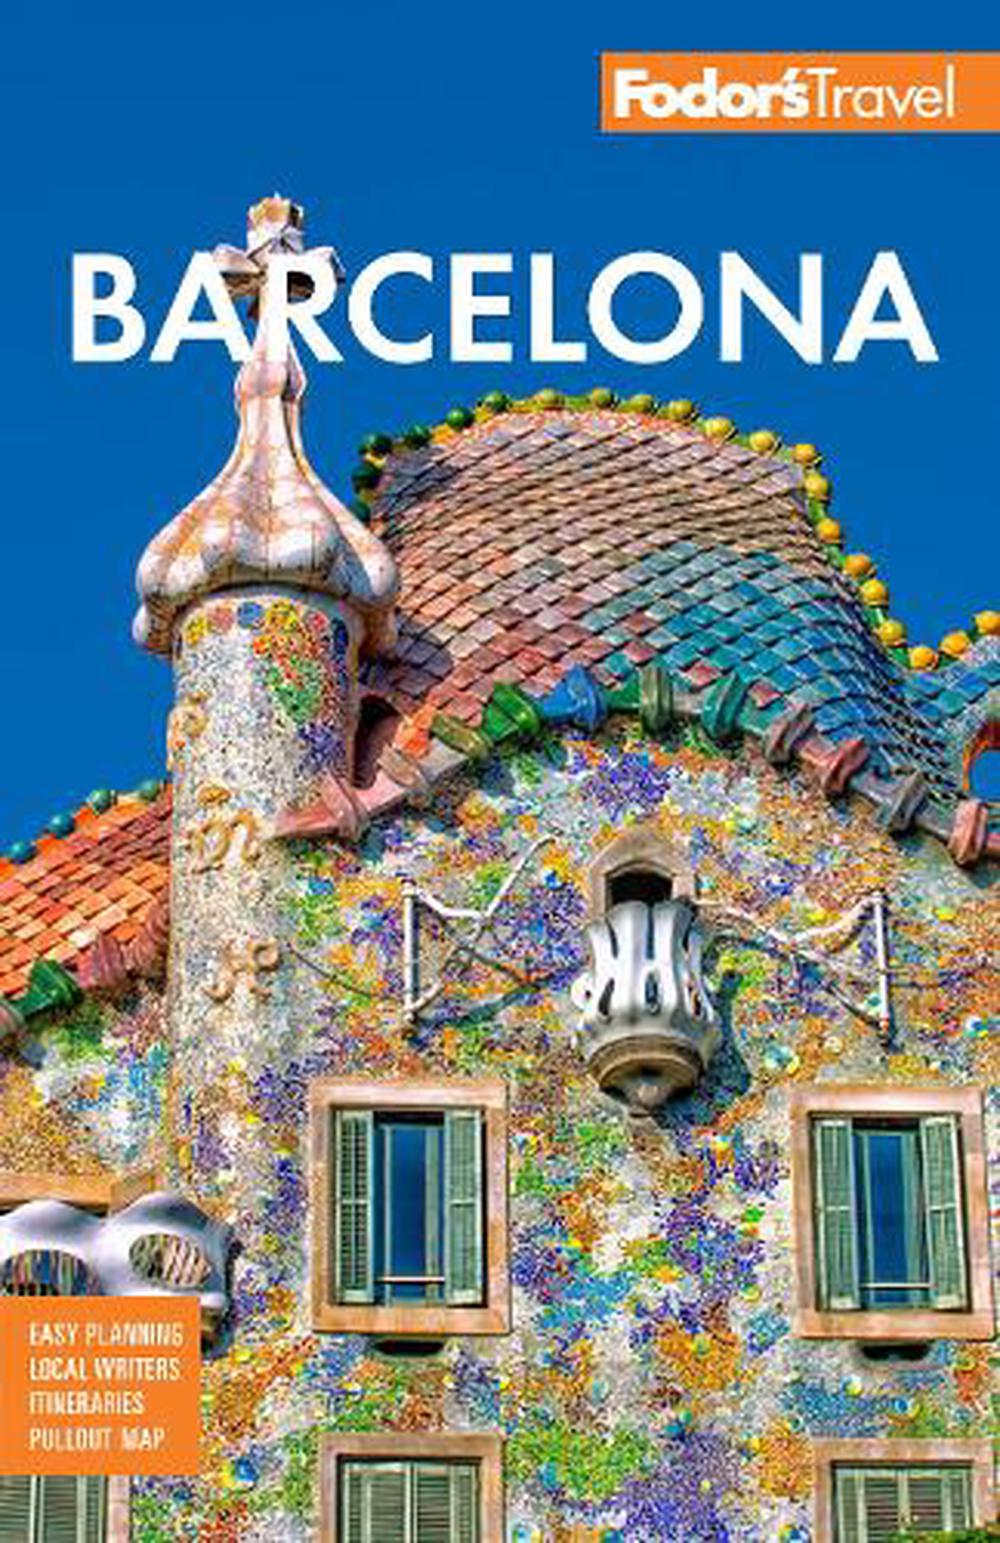 Guides,　Fodor's　Buy　Barcelona　at　by　9781640975293　Fodor's　Travel　Paperback,　online　The　Nile